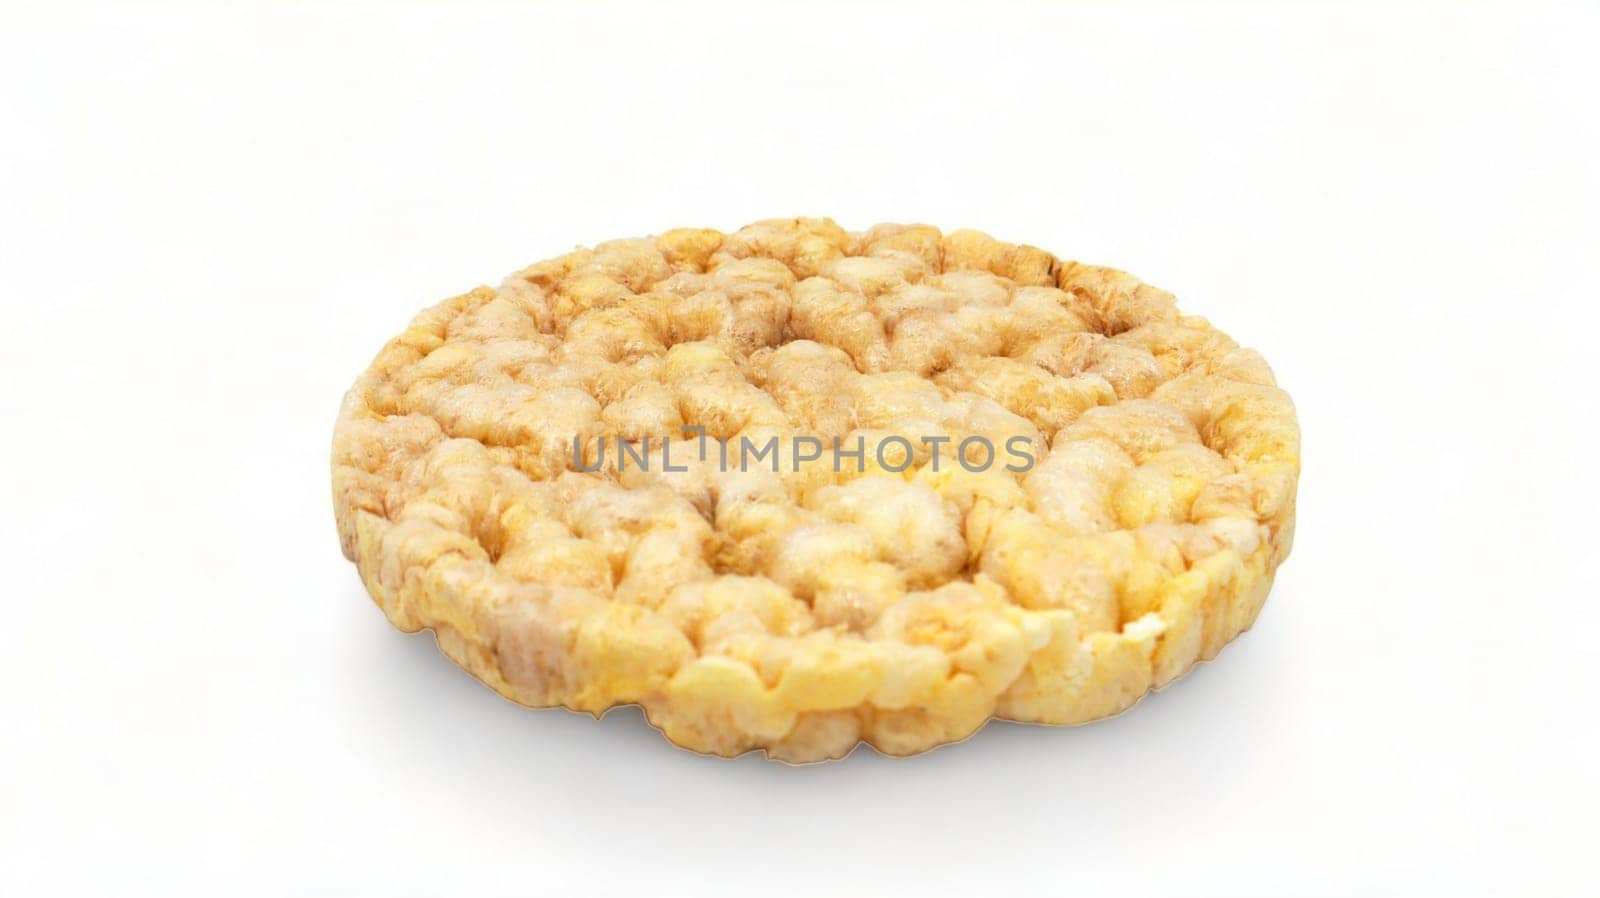 Round puffed rice cakes on a white background. Bread, bread crusts. Diet food concept. Healthy food. Rice bread